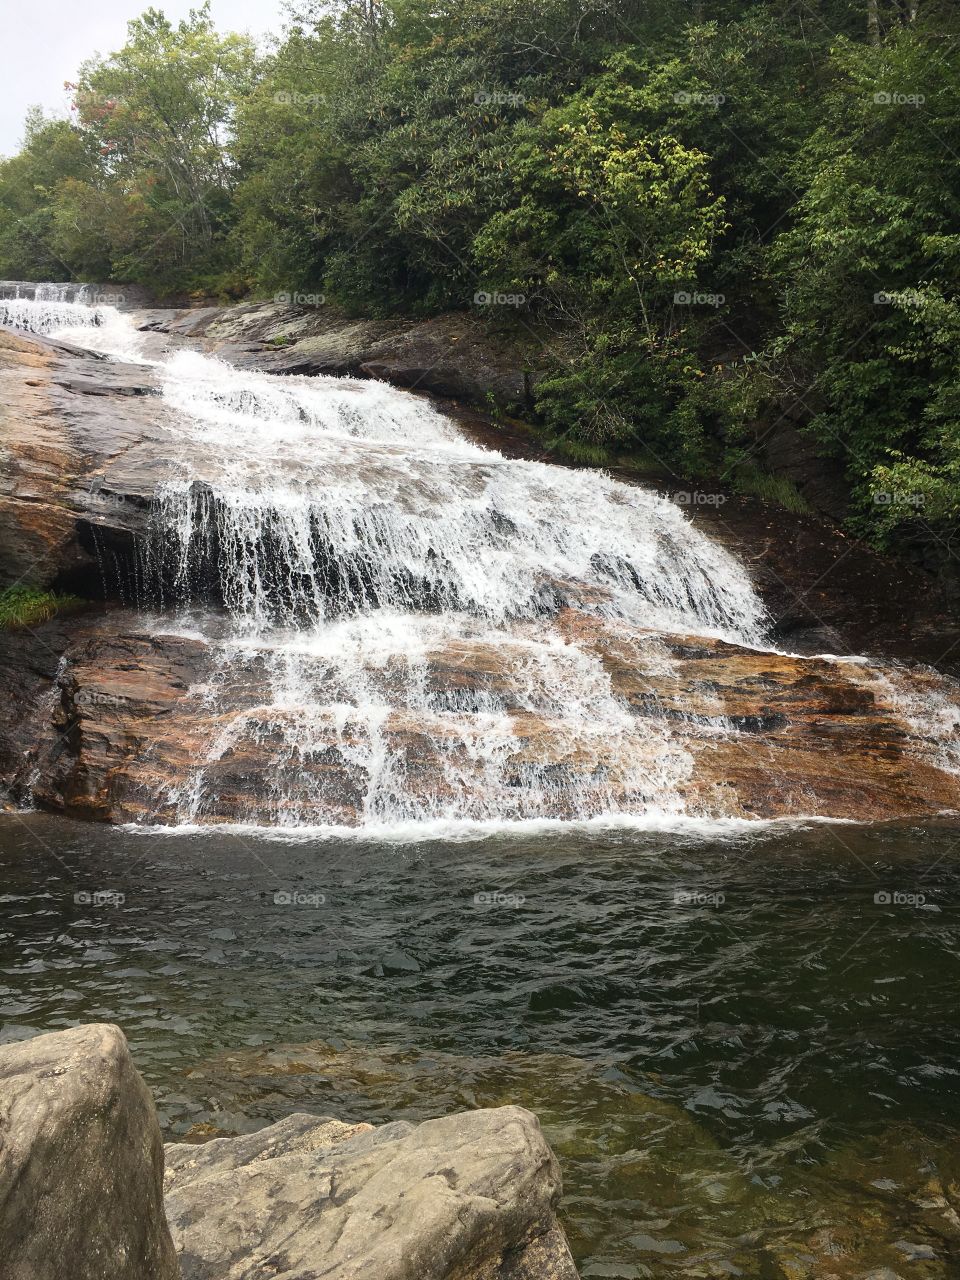 My favorite waterfall, off the Blue Ridge Parkway in NC. Too bad it was a little too cold for swimming that day.